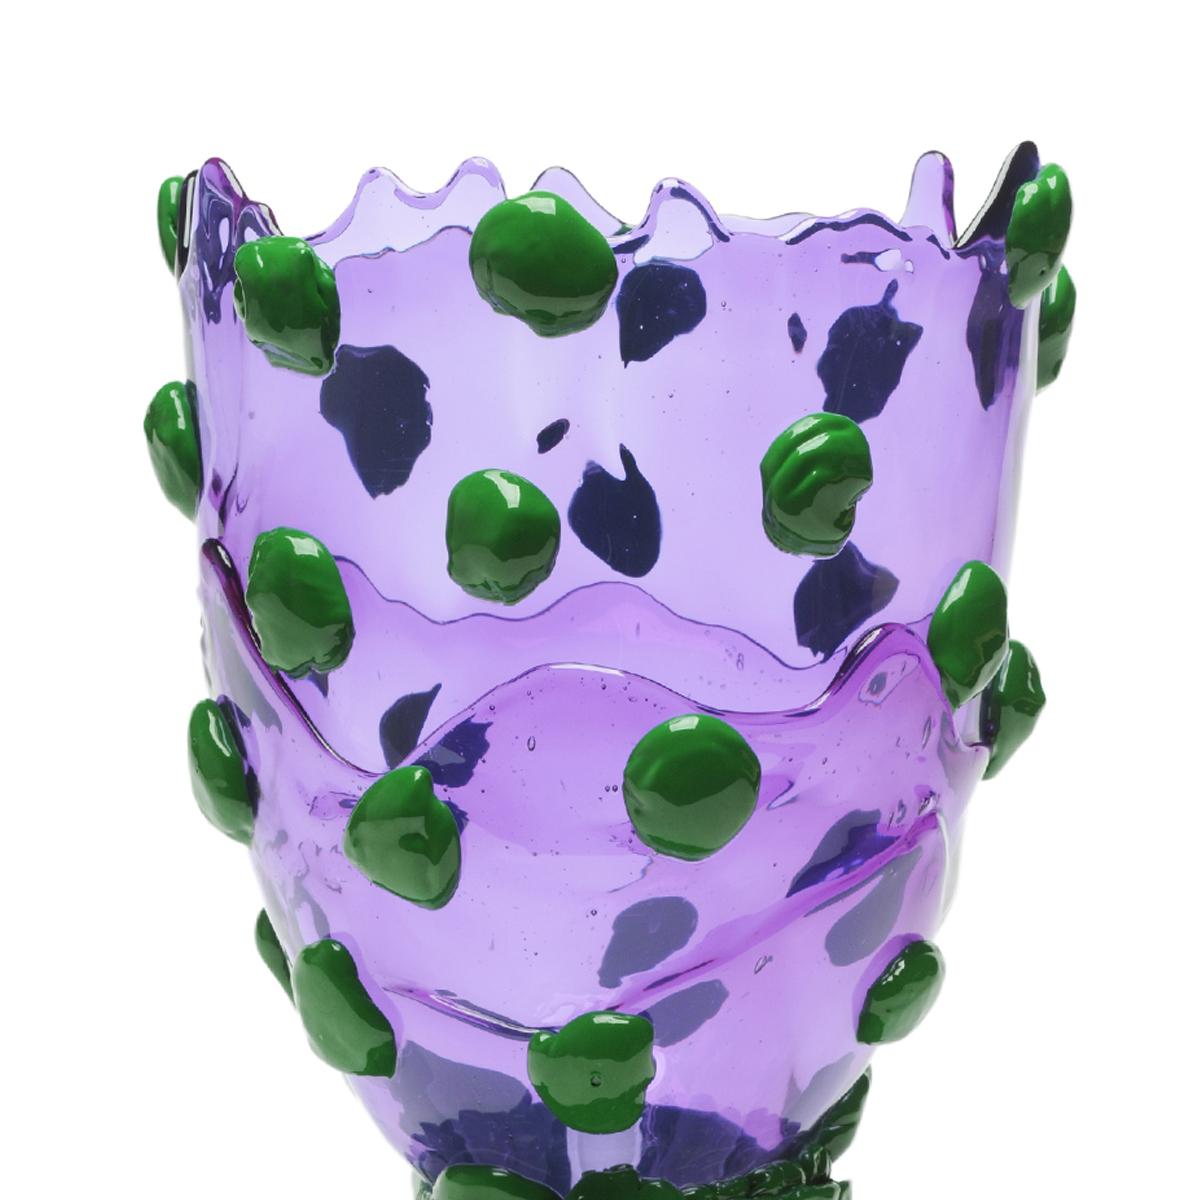 Nugget vase, clear purple, matt green.
Vase in soft resin designed by Gaetano Pesce in 1995 for Fish Design collection.

Measures: XL - Ø 30cm x H 56cm
Colours: clear purple, matt green.
Other sizes available.
Vase in soft resin designed by